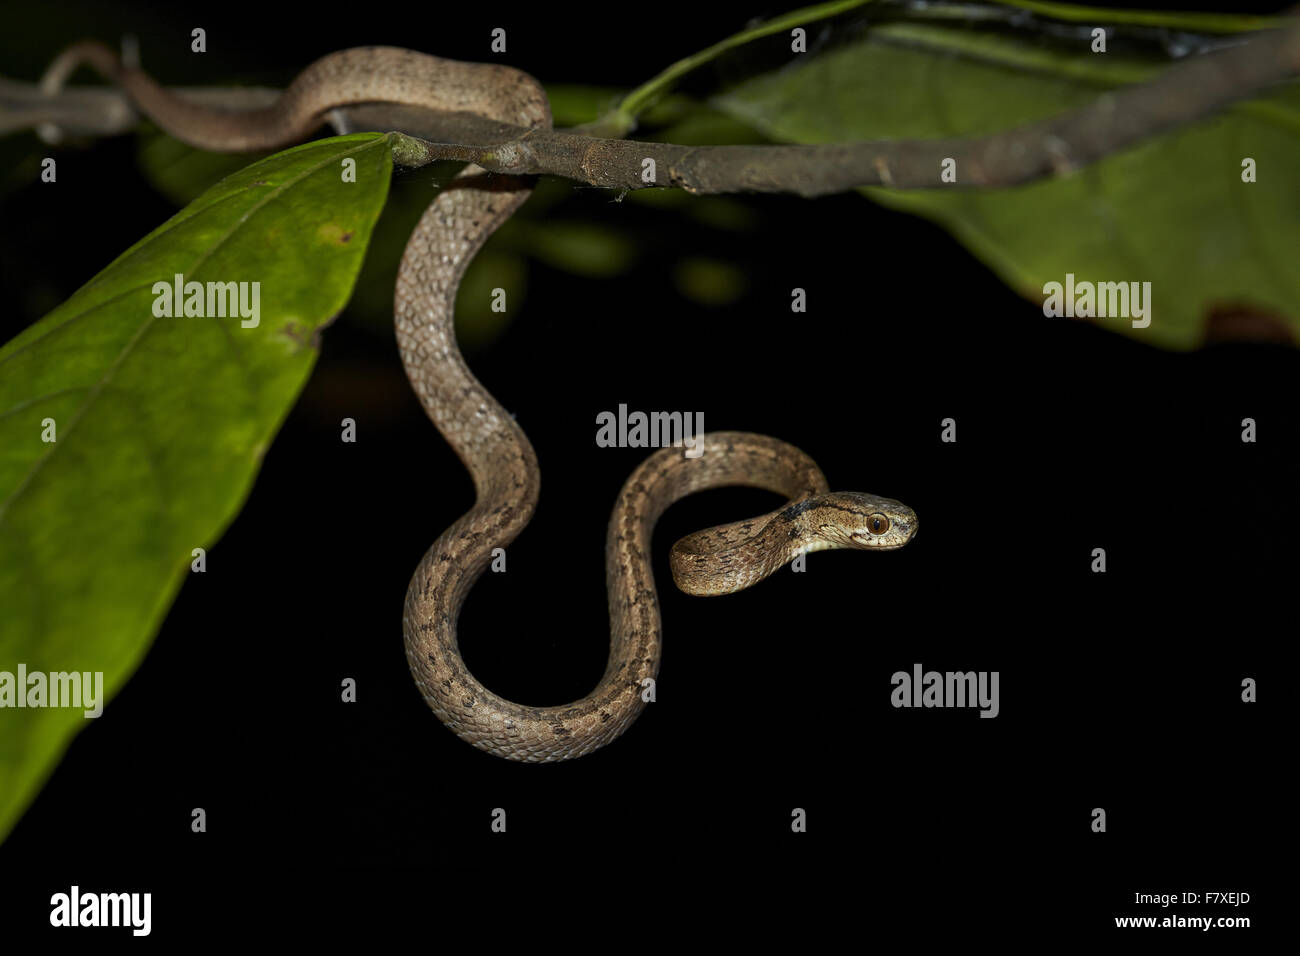 Dog-toothed Cat Snake (Boiga cynodon) young, hanging from branch at night, Bali, Lesser Sunda Islands, Indonesia, July Stock Photo